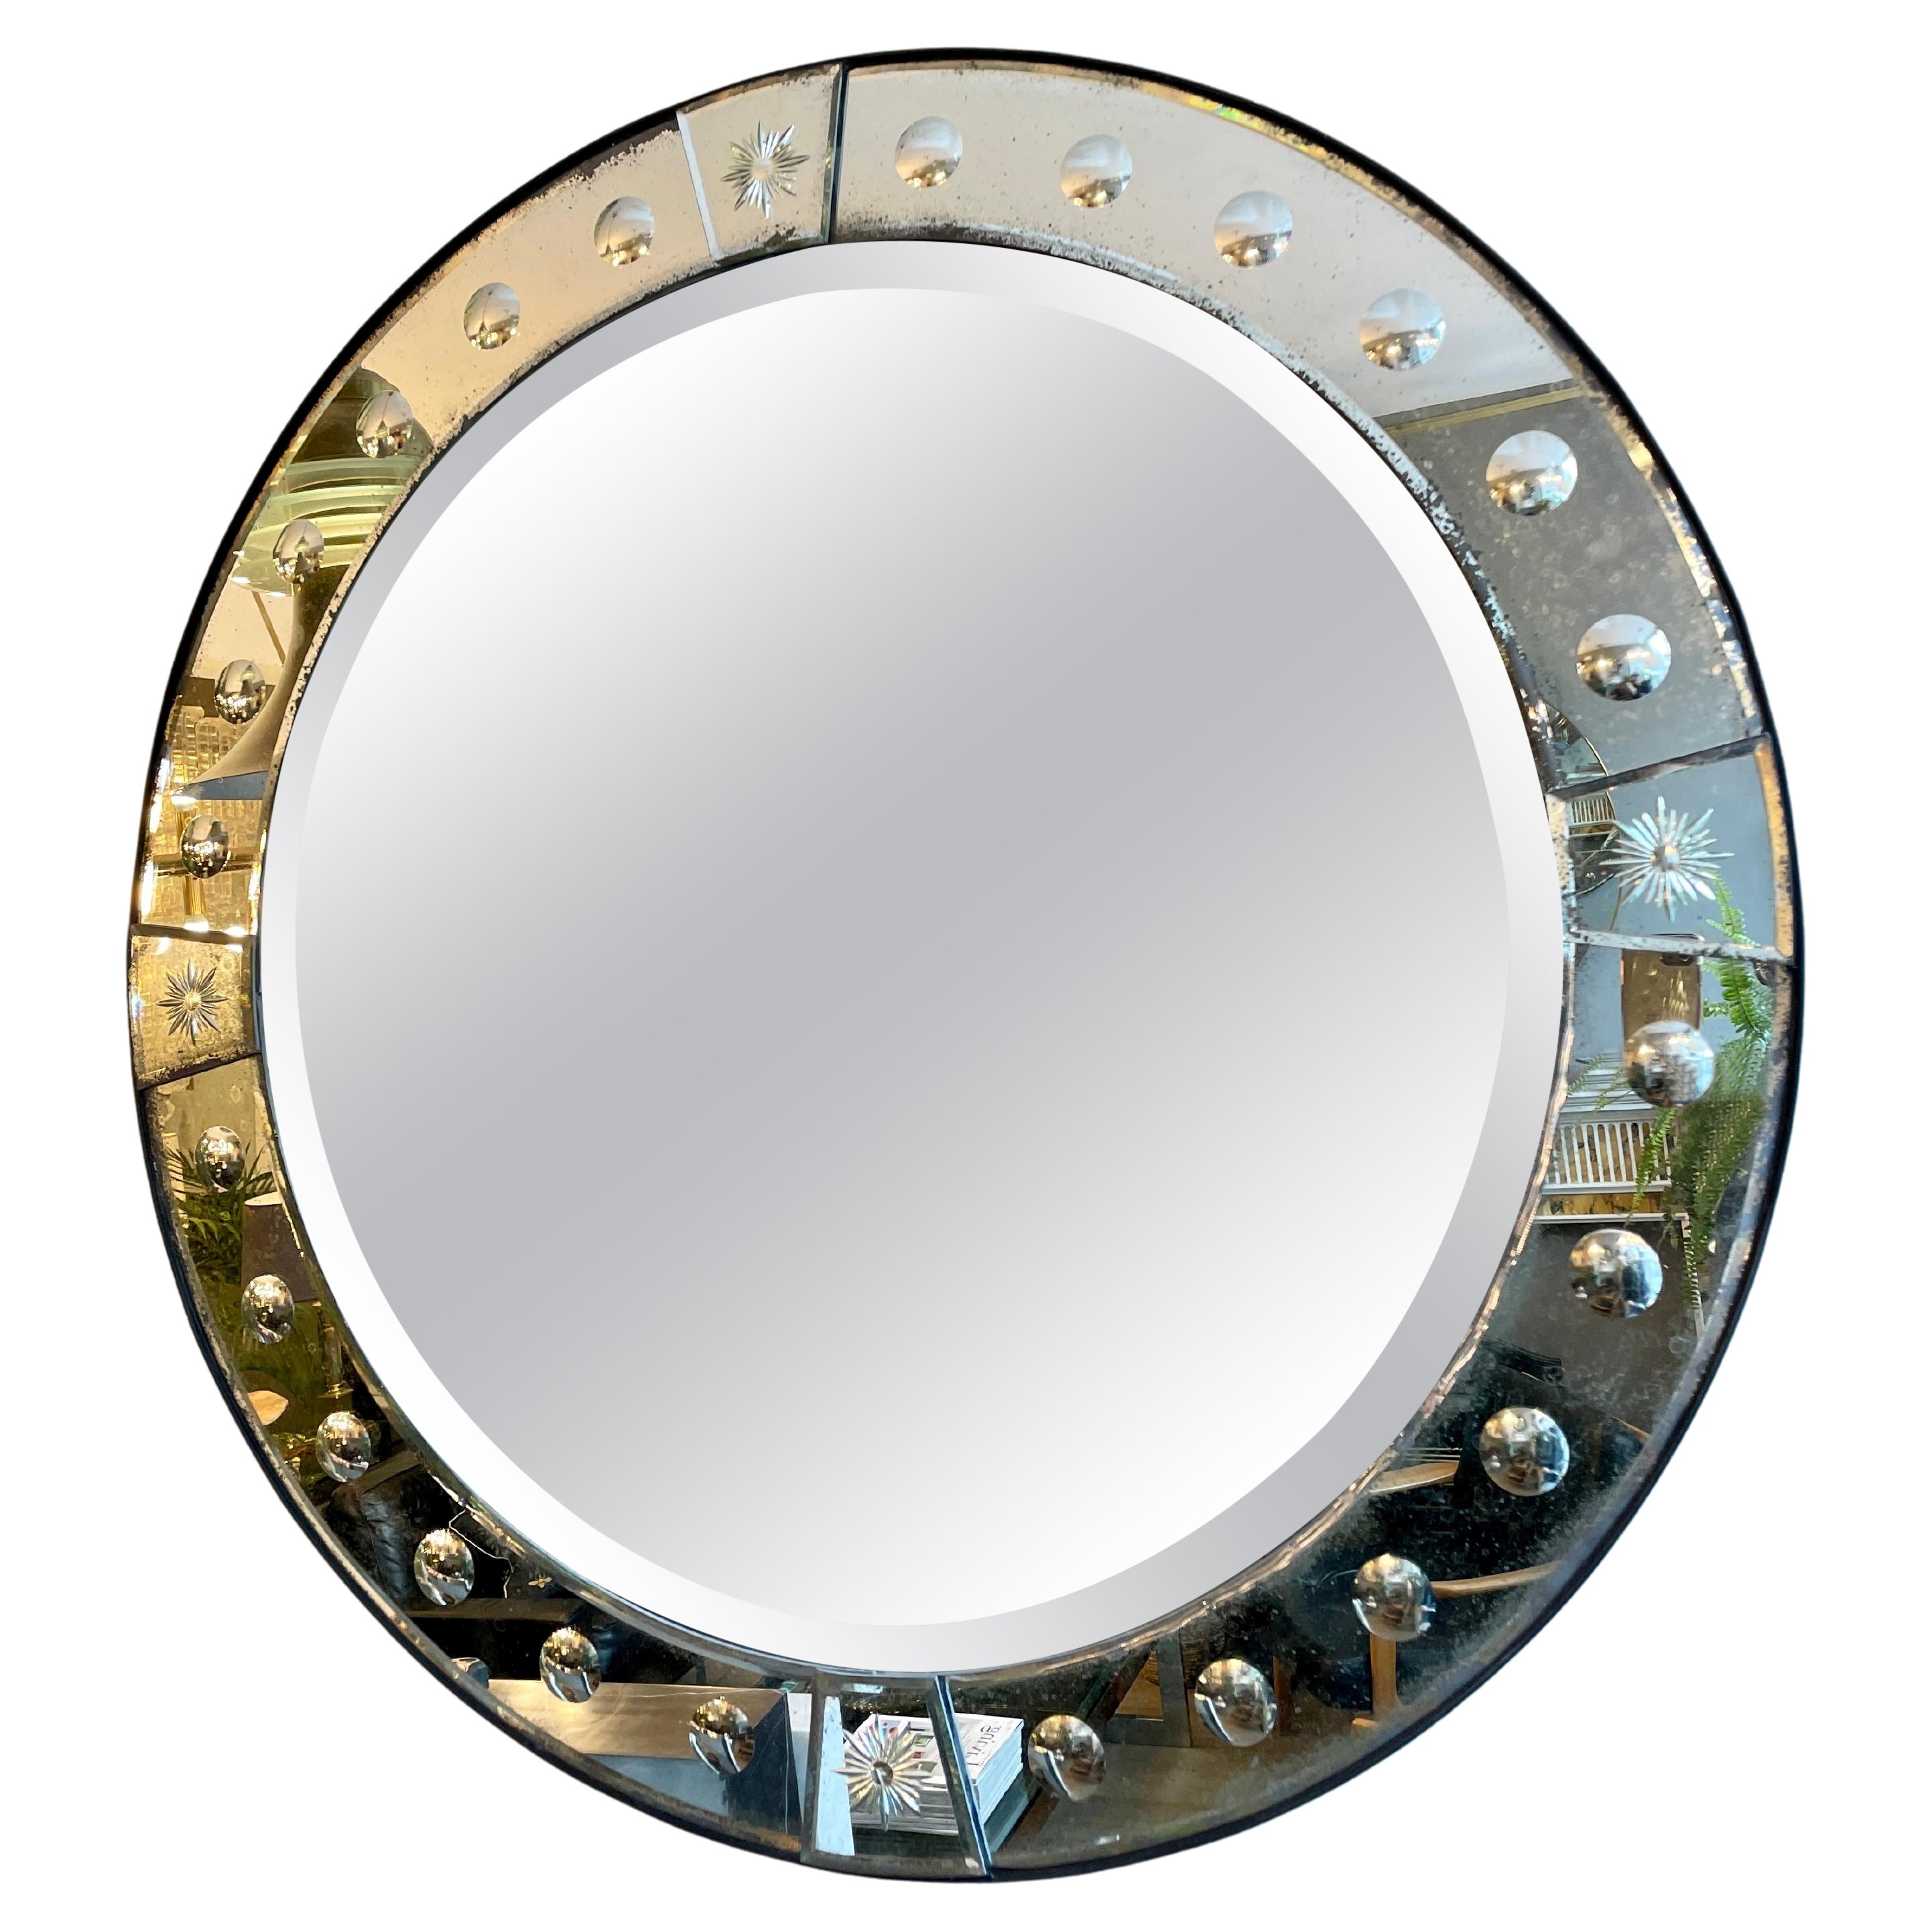 A circular mirror with panelled mirror border in lightly distressed plate, mounted on timber which has an ebonized steel banded edge. Decorated with circular engraved and bevelled glass.